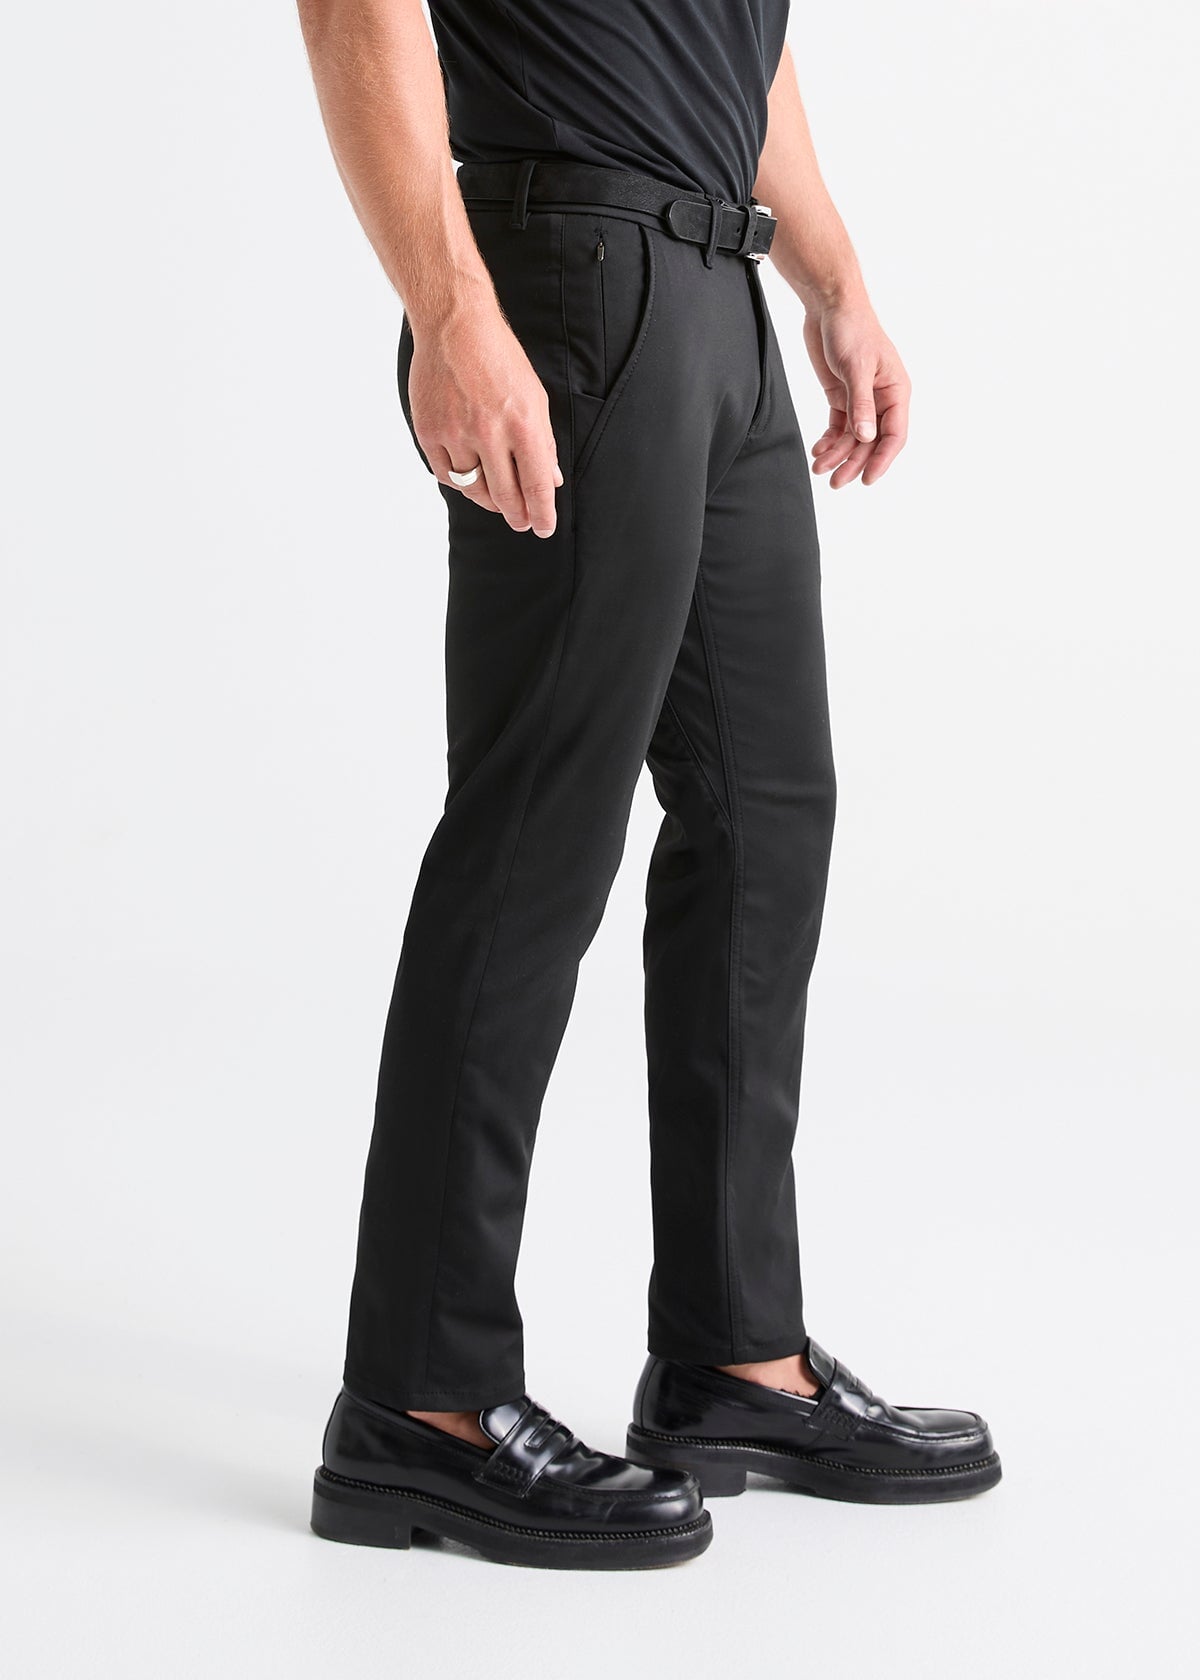 All Day, Everyday Super - Stretch Men's Pants - Business Casual - Black -  Performance Collection